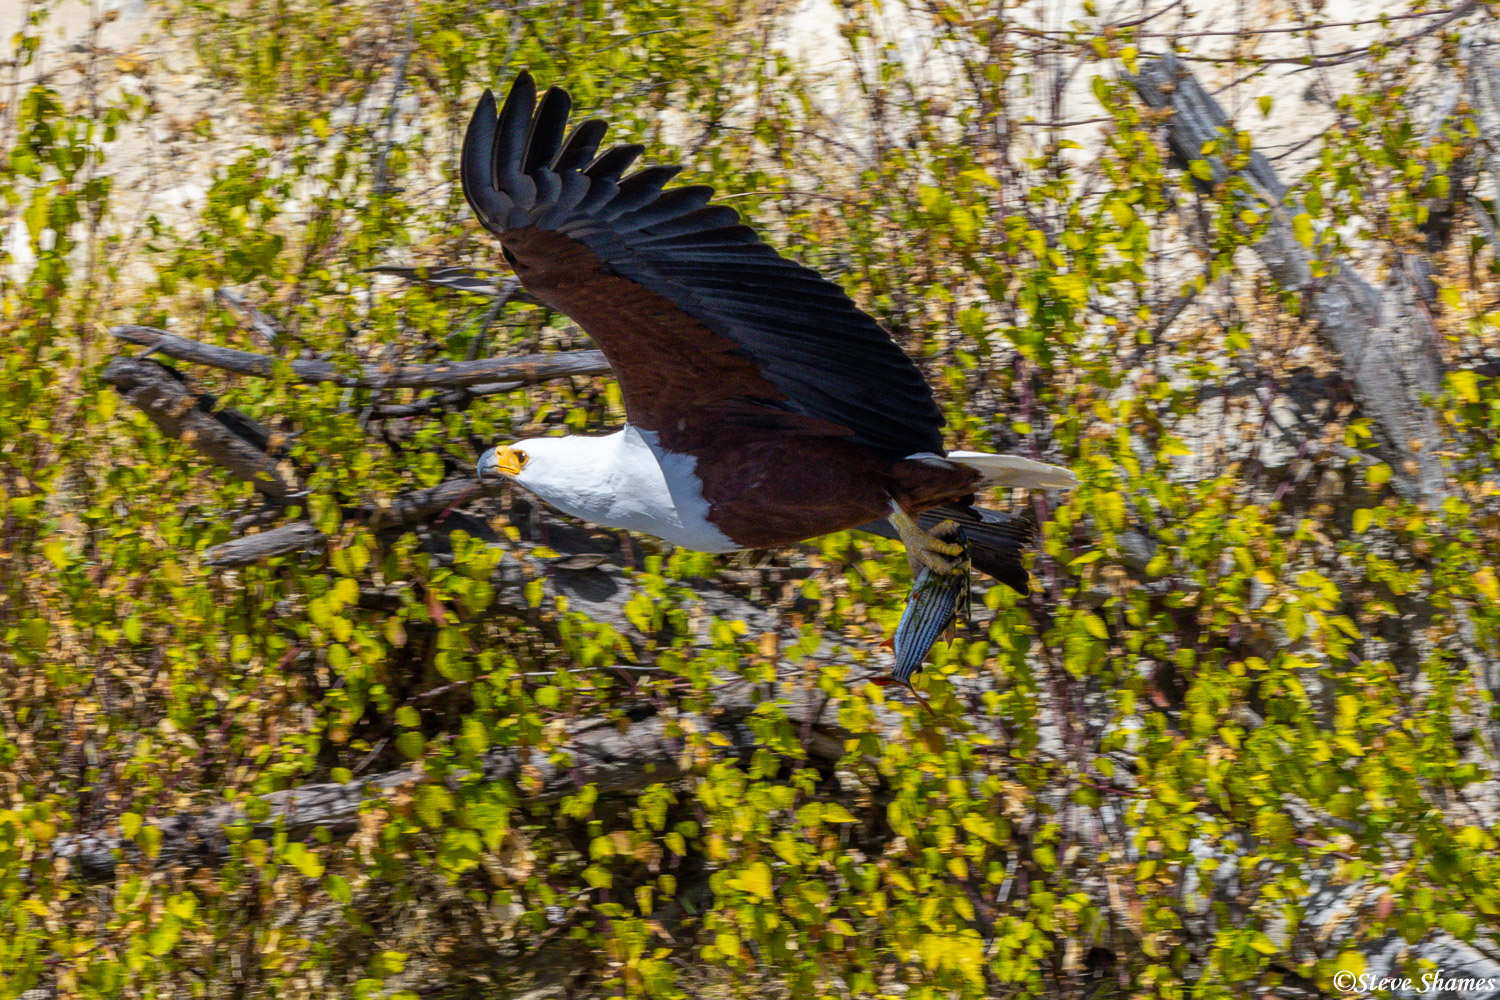 Fish eagle flying, with the catch of the day in its talons!